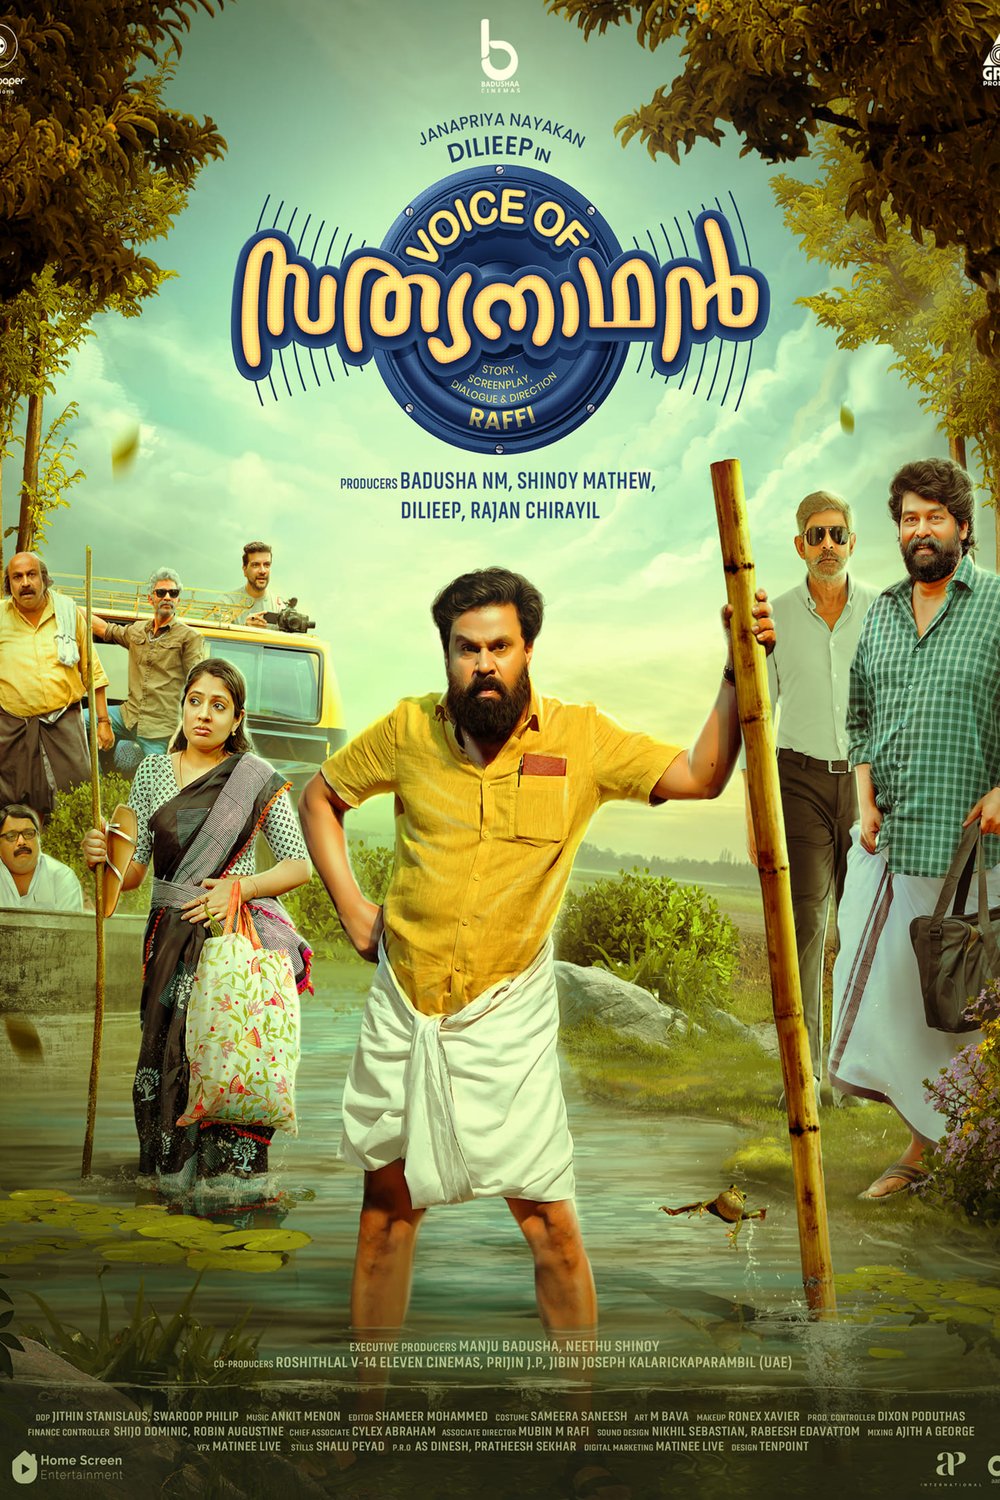 Malayalam poster of the movie Voice of Sathyanathan